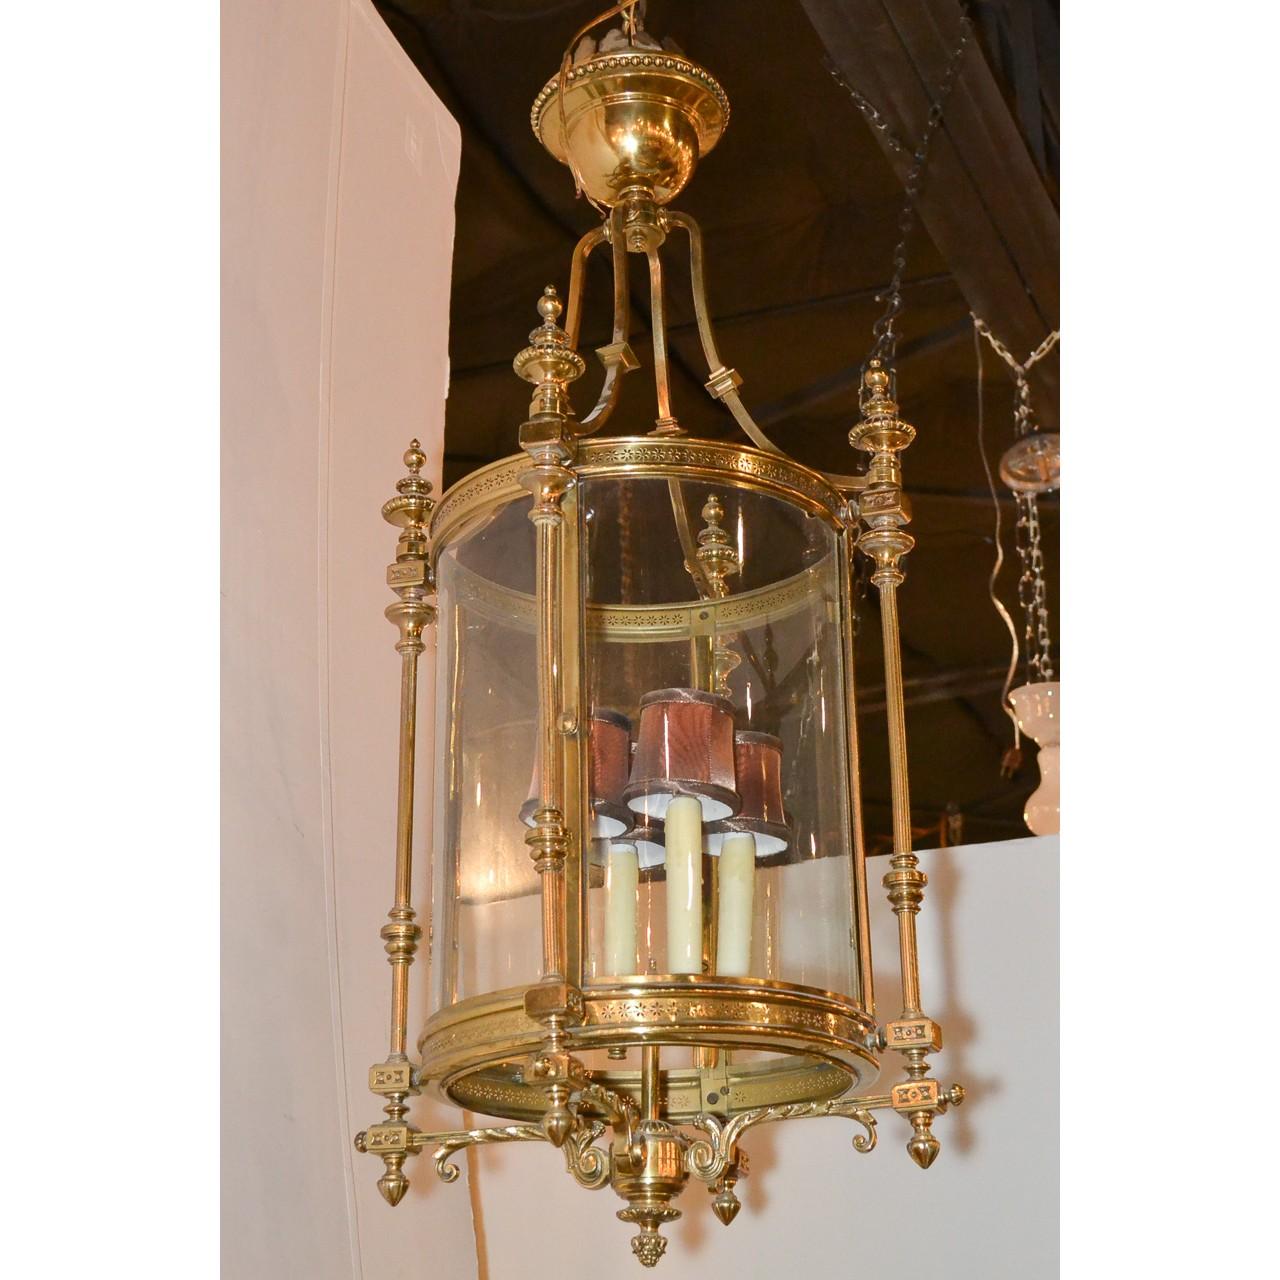 Early 20th century cast brass hall lantern with glass encasing 4 lights.
We will supply 3 feet of chain and canopy.
Made in Europe, circa 1920.
17 inches wide x 36 inches height.